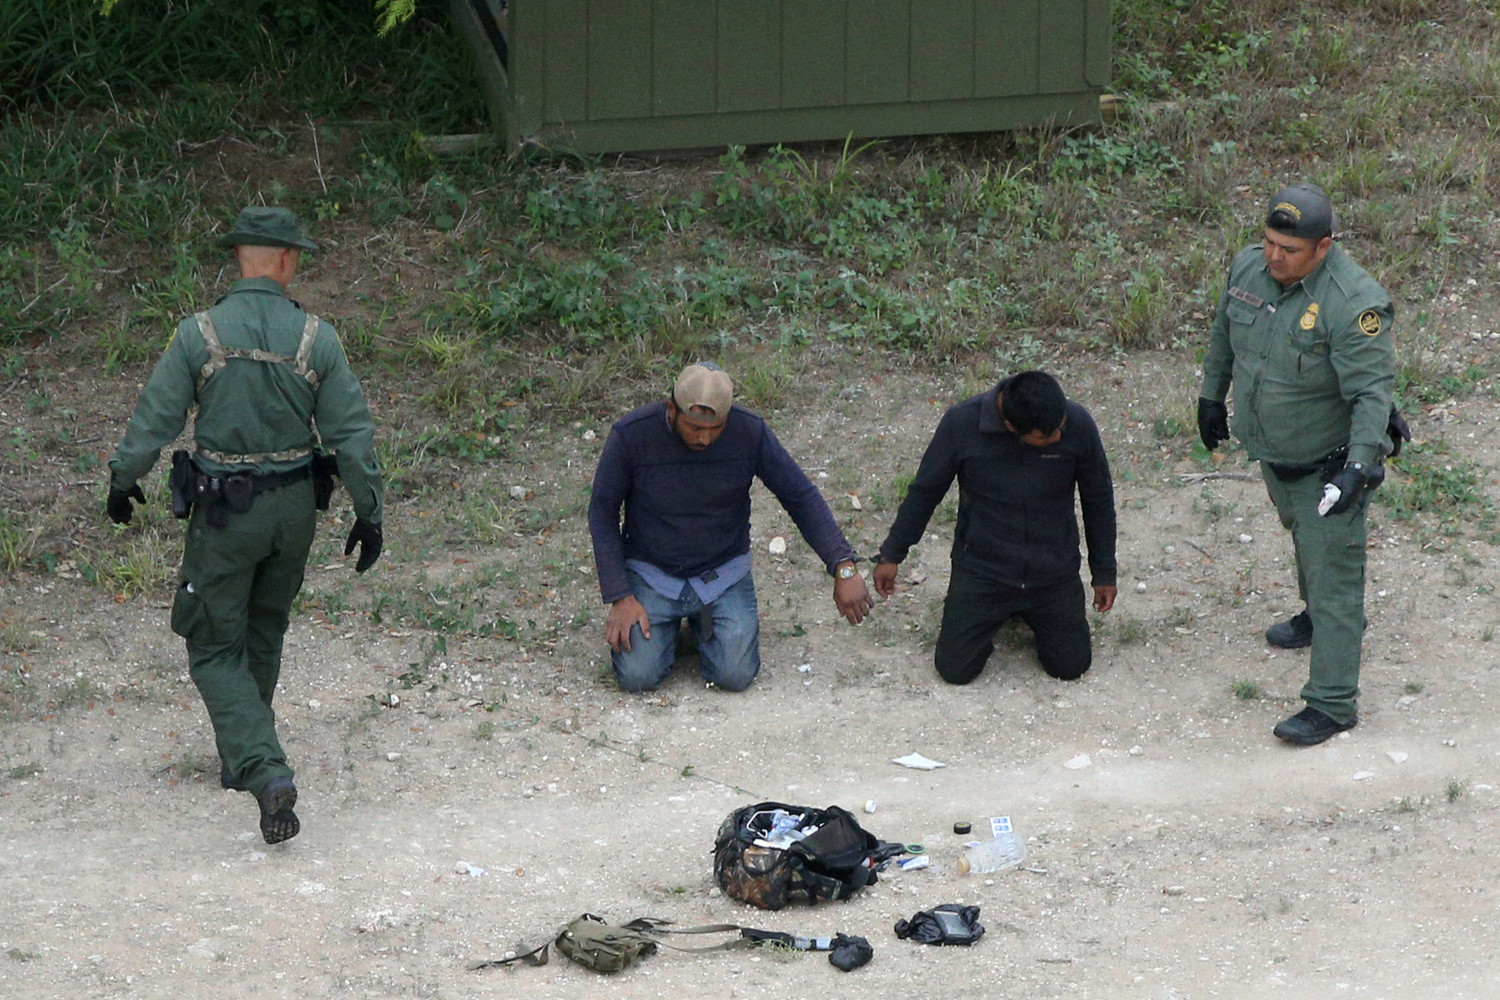 Border Patrol agents apprehend people who illegally crossed the border from Mexico into the U.S. in the Rio Grande Valley sector, near Falfurrias, Texas. U.S. President Donald Trump officially signed a memorandum April 4 to deploy the National Guard to the southwest border.